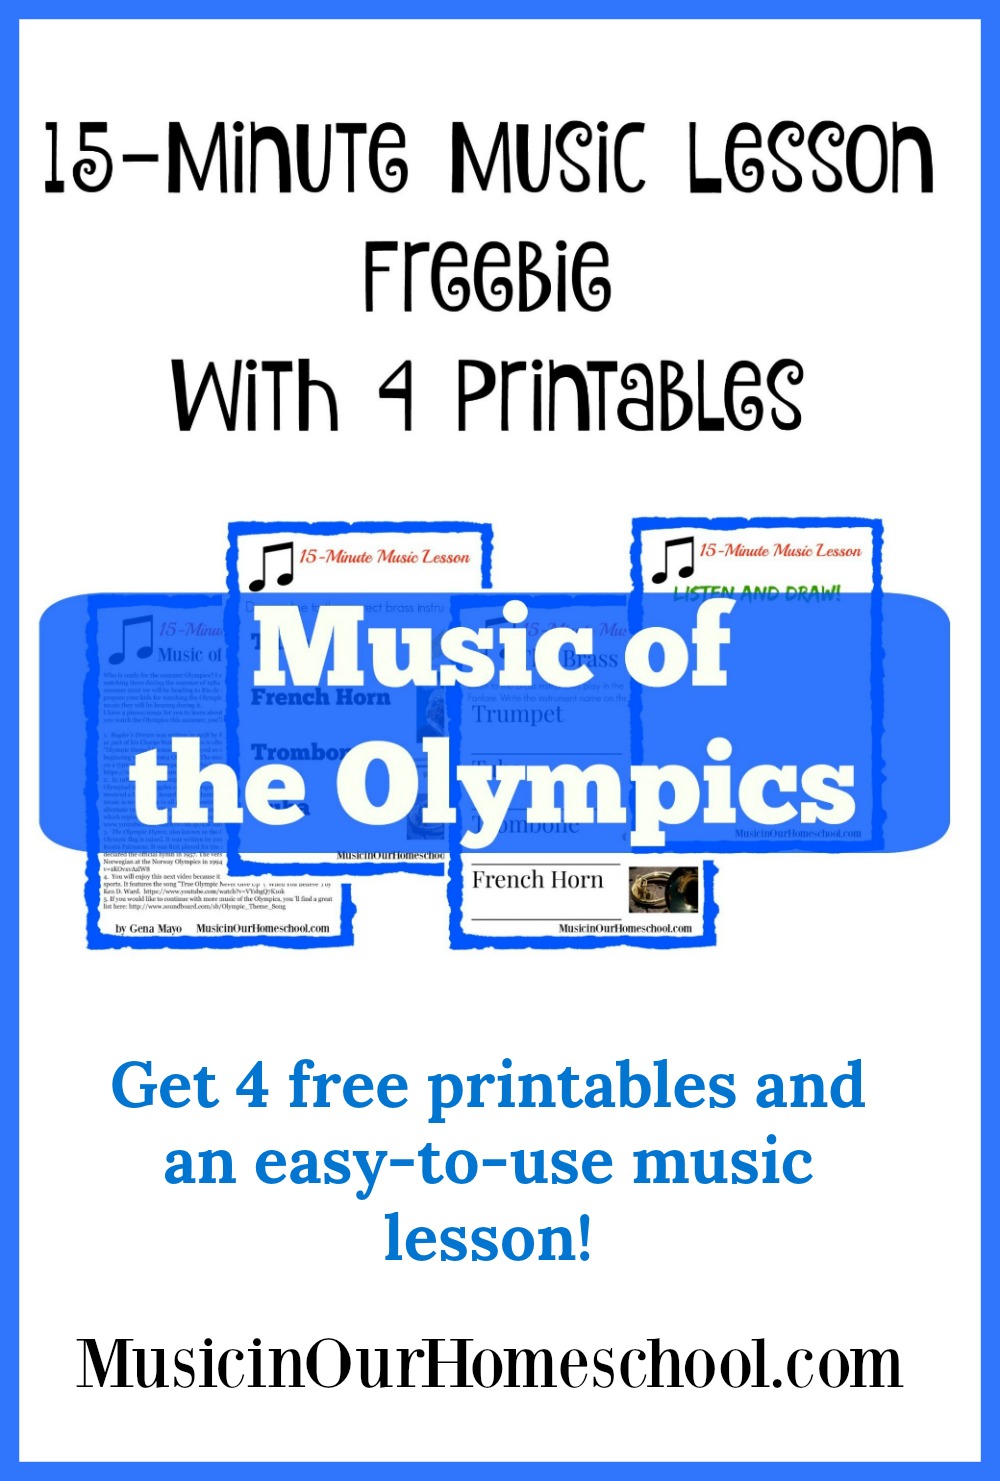 Get this free 15-Minute Music Lesson for music of the Olympics. #musicinourhomeschool #homeschoolmusic #elementarymusic #musiclessonsforkids